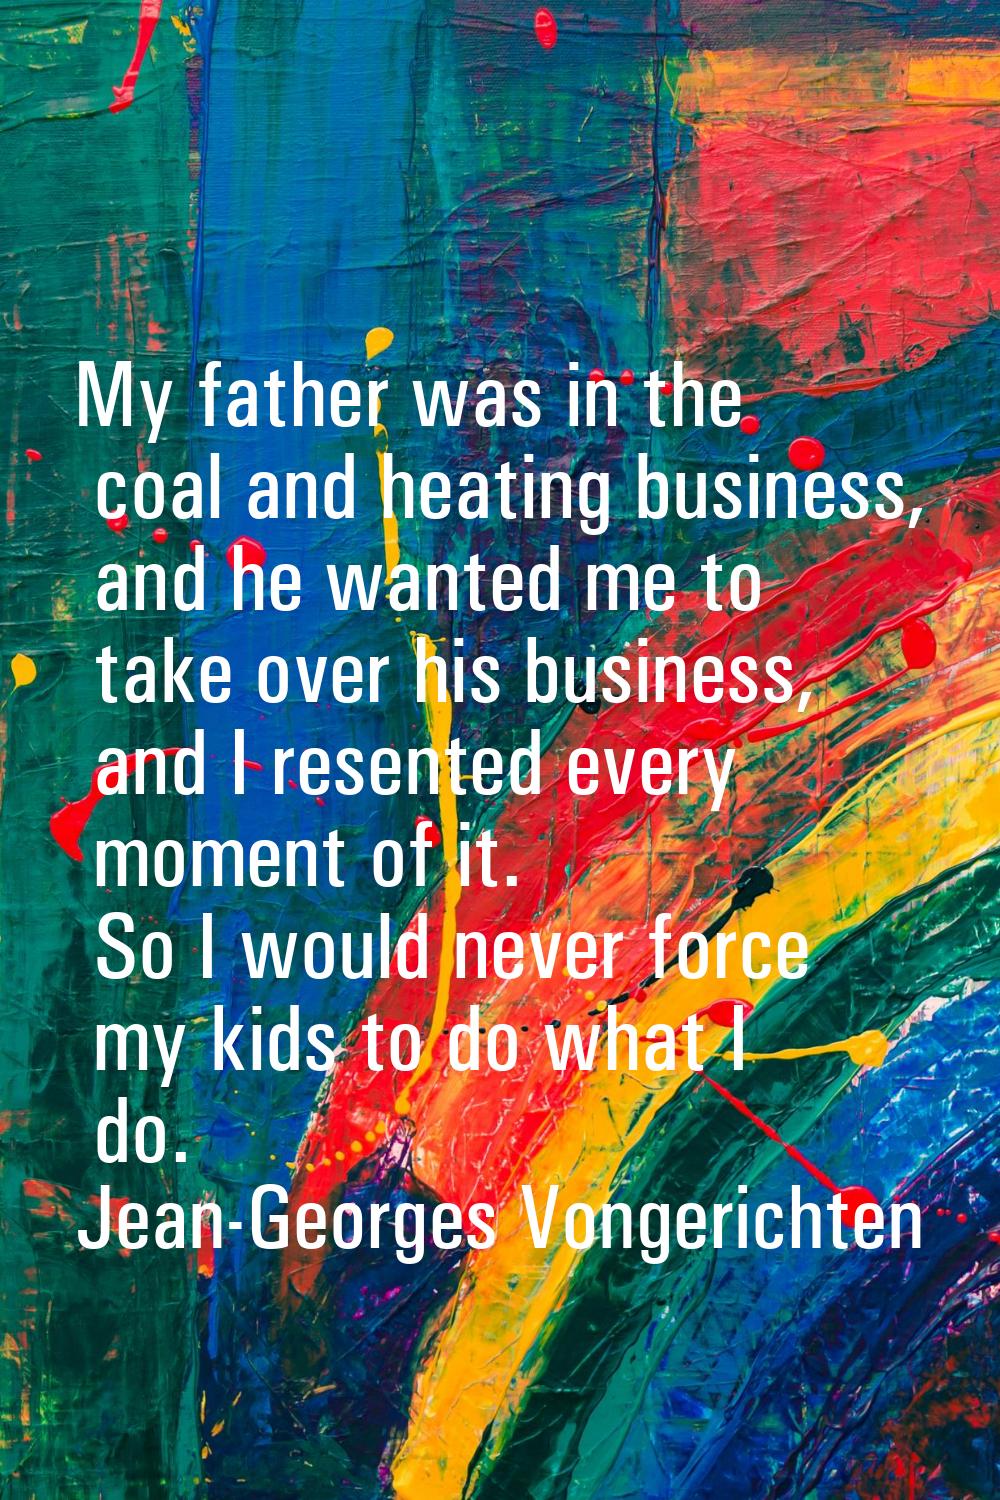 My father was in the coal and heating business, and he wanted me to take over his business, and I r